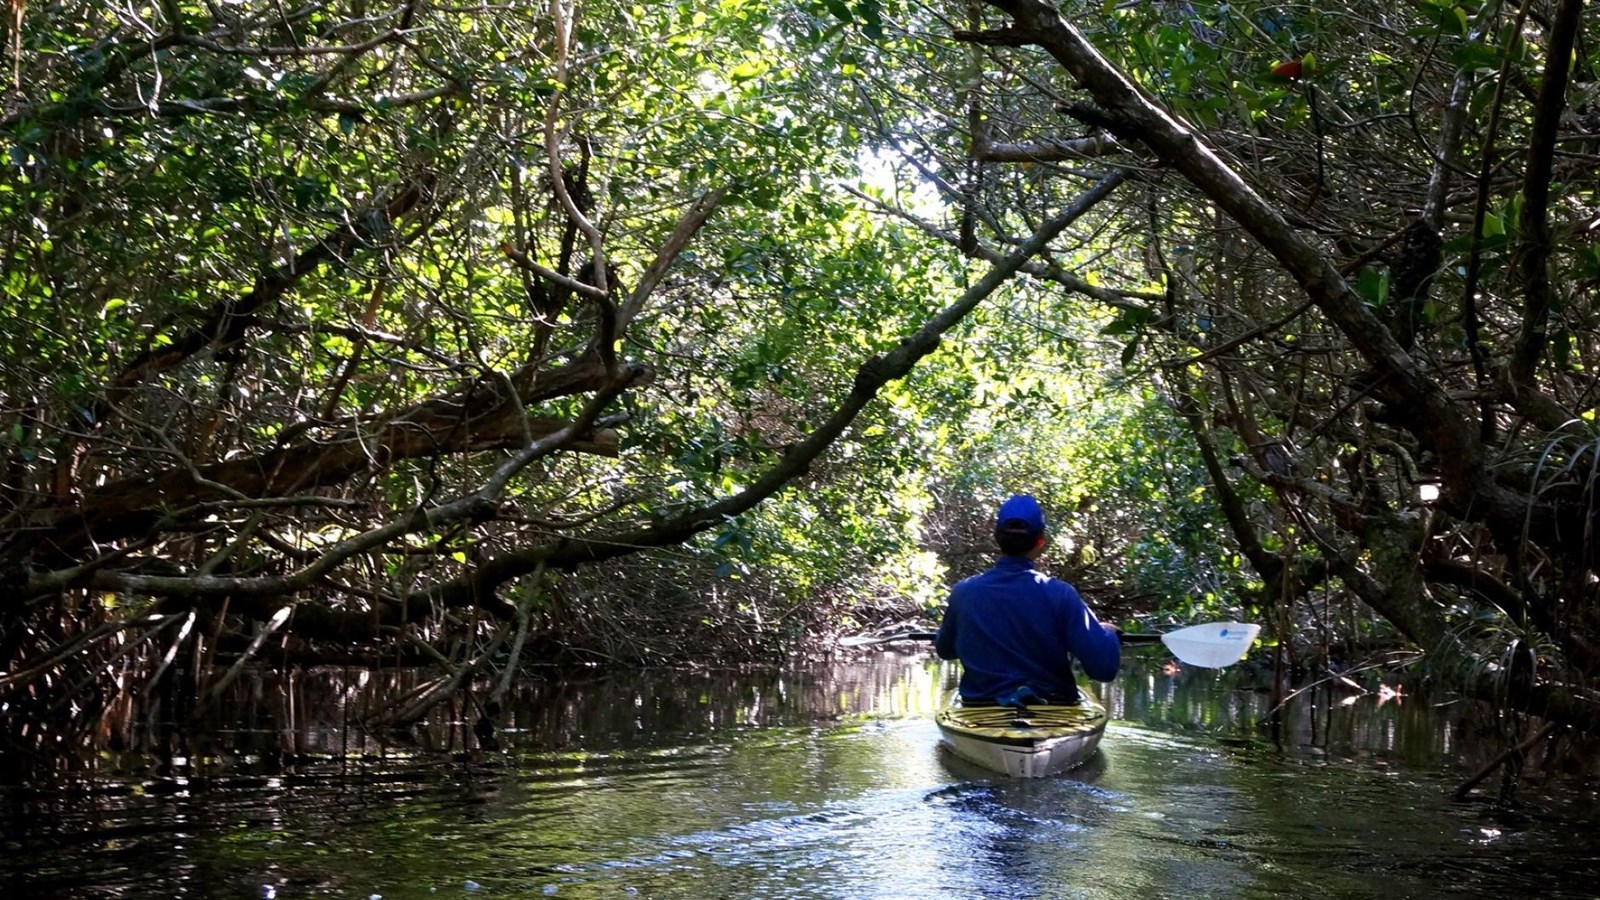 A kayaker lifts their paddle out of the water. Mangrove branches and thick vegetation overhang